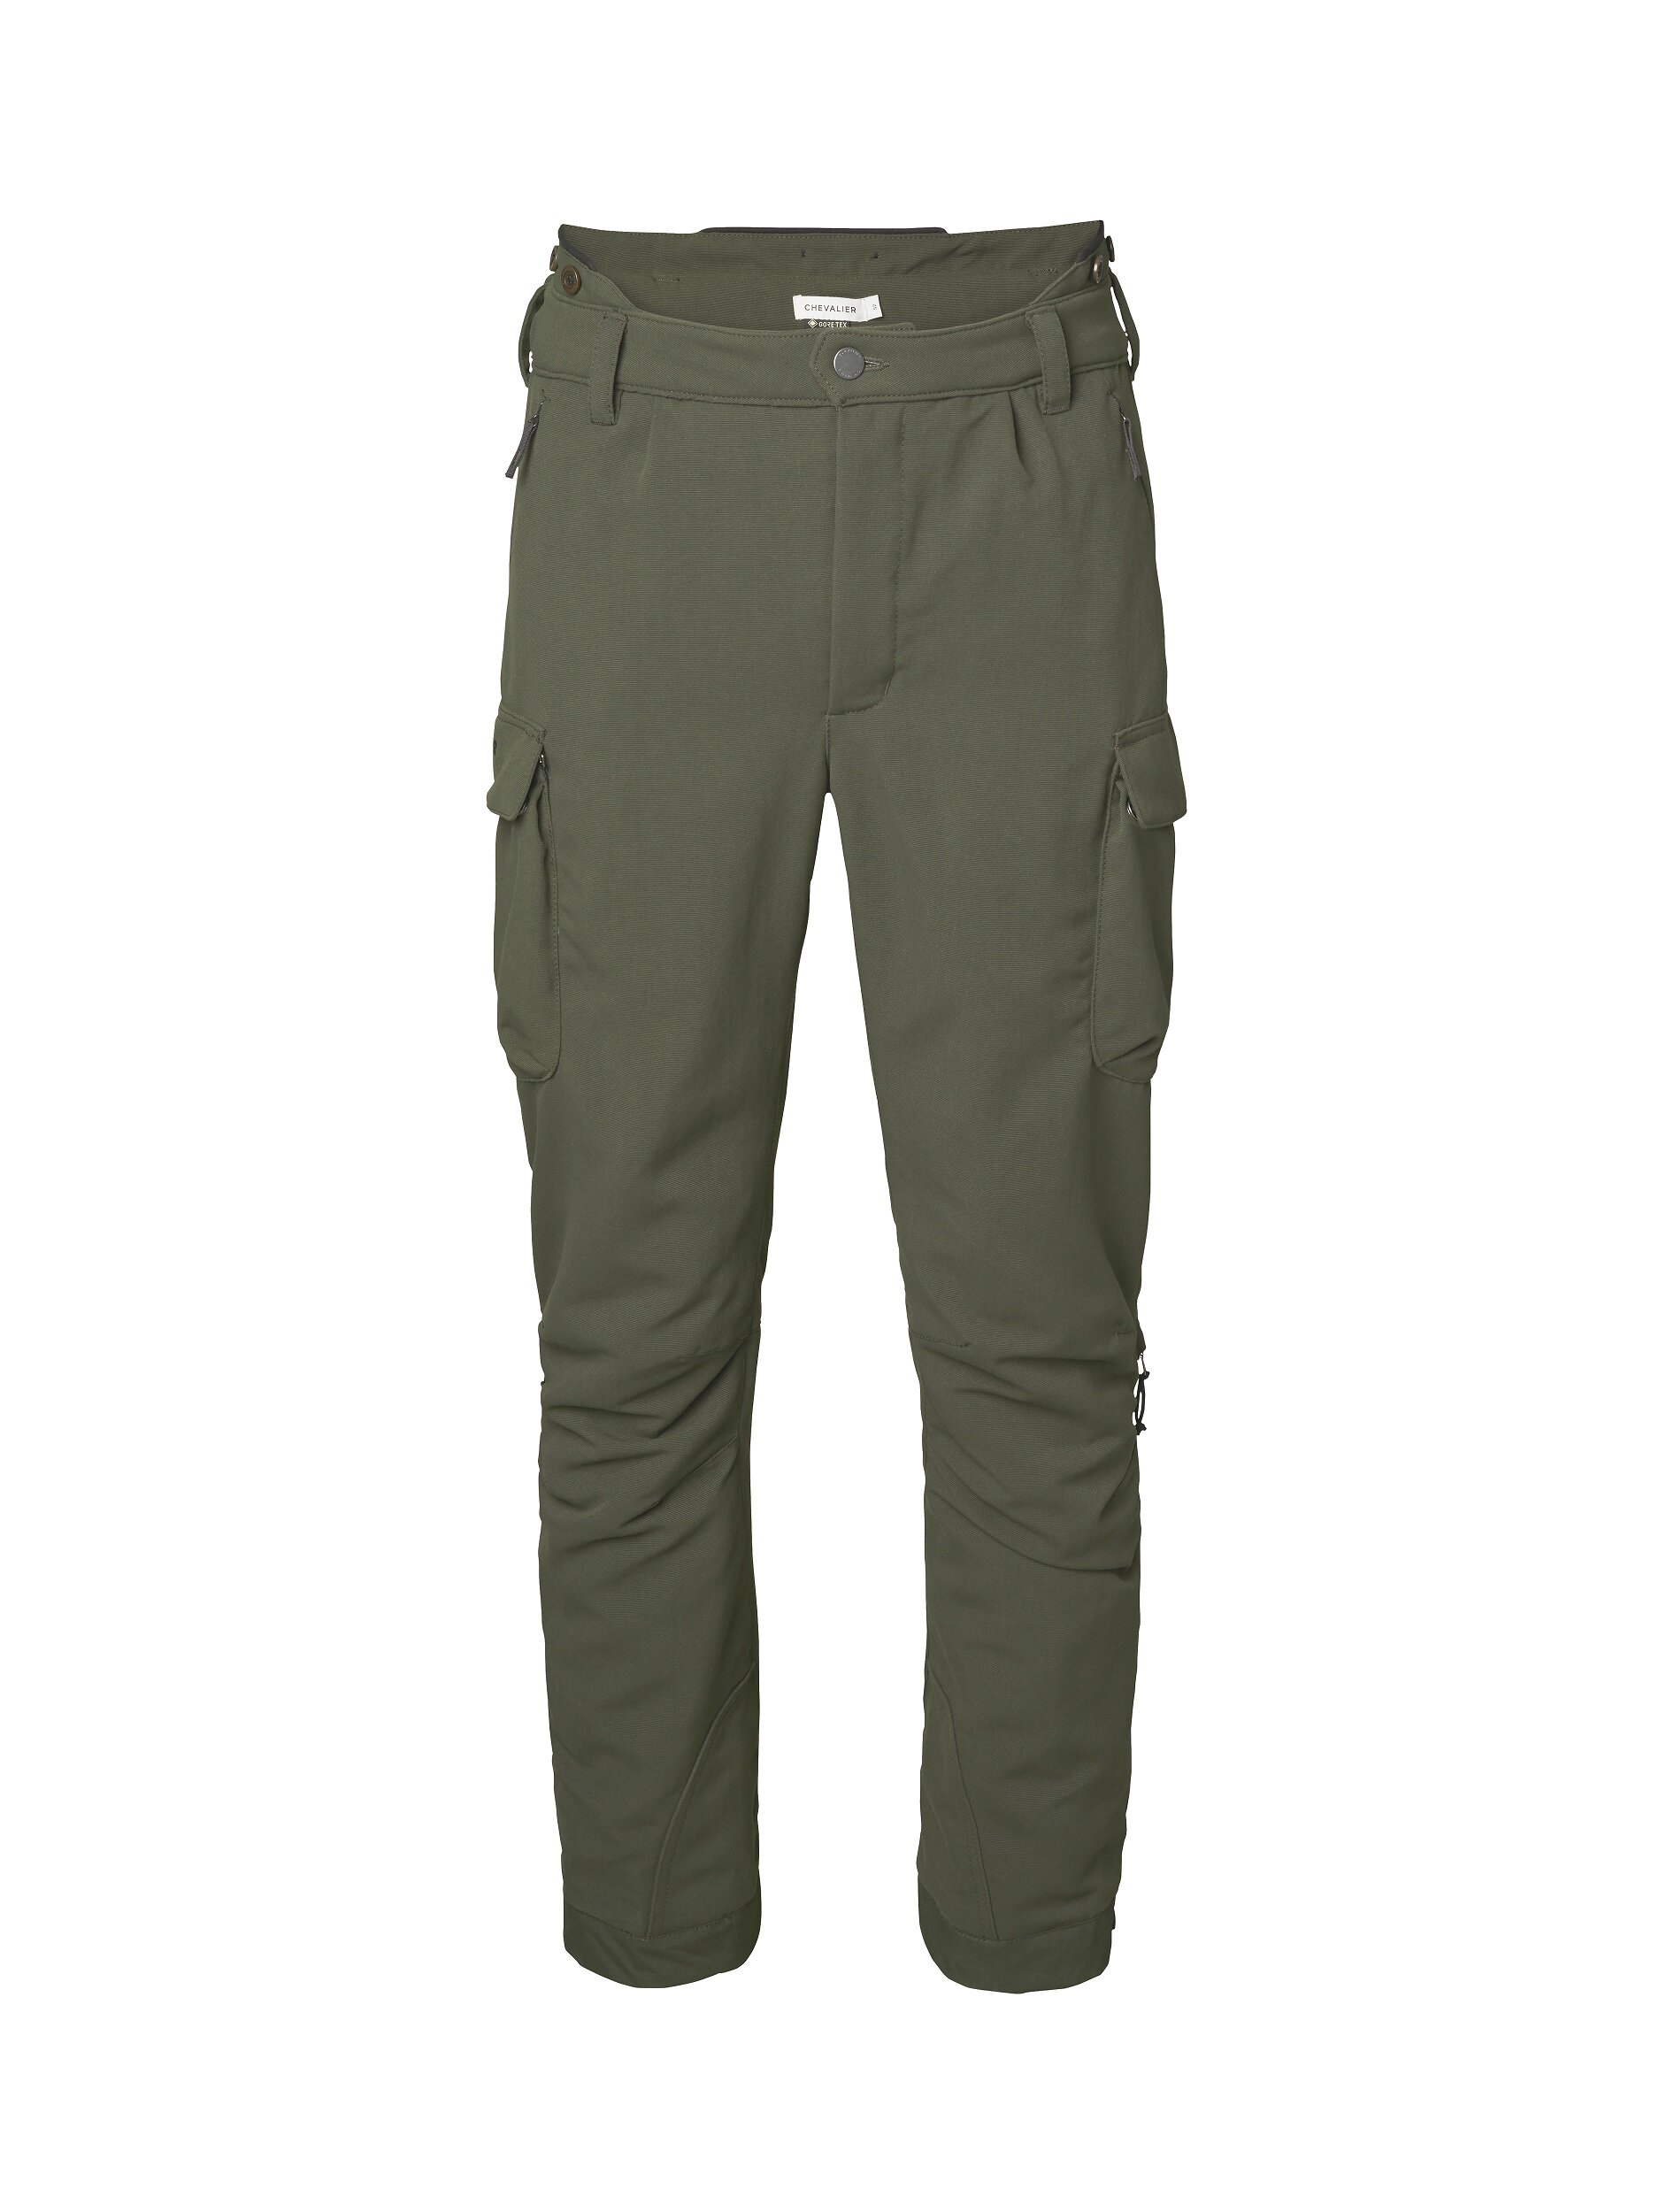 Thermal Skinny Outdoor Pants Forest Green Fleece Lined